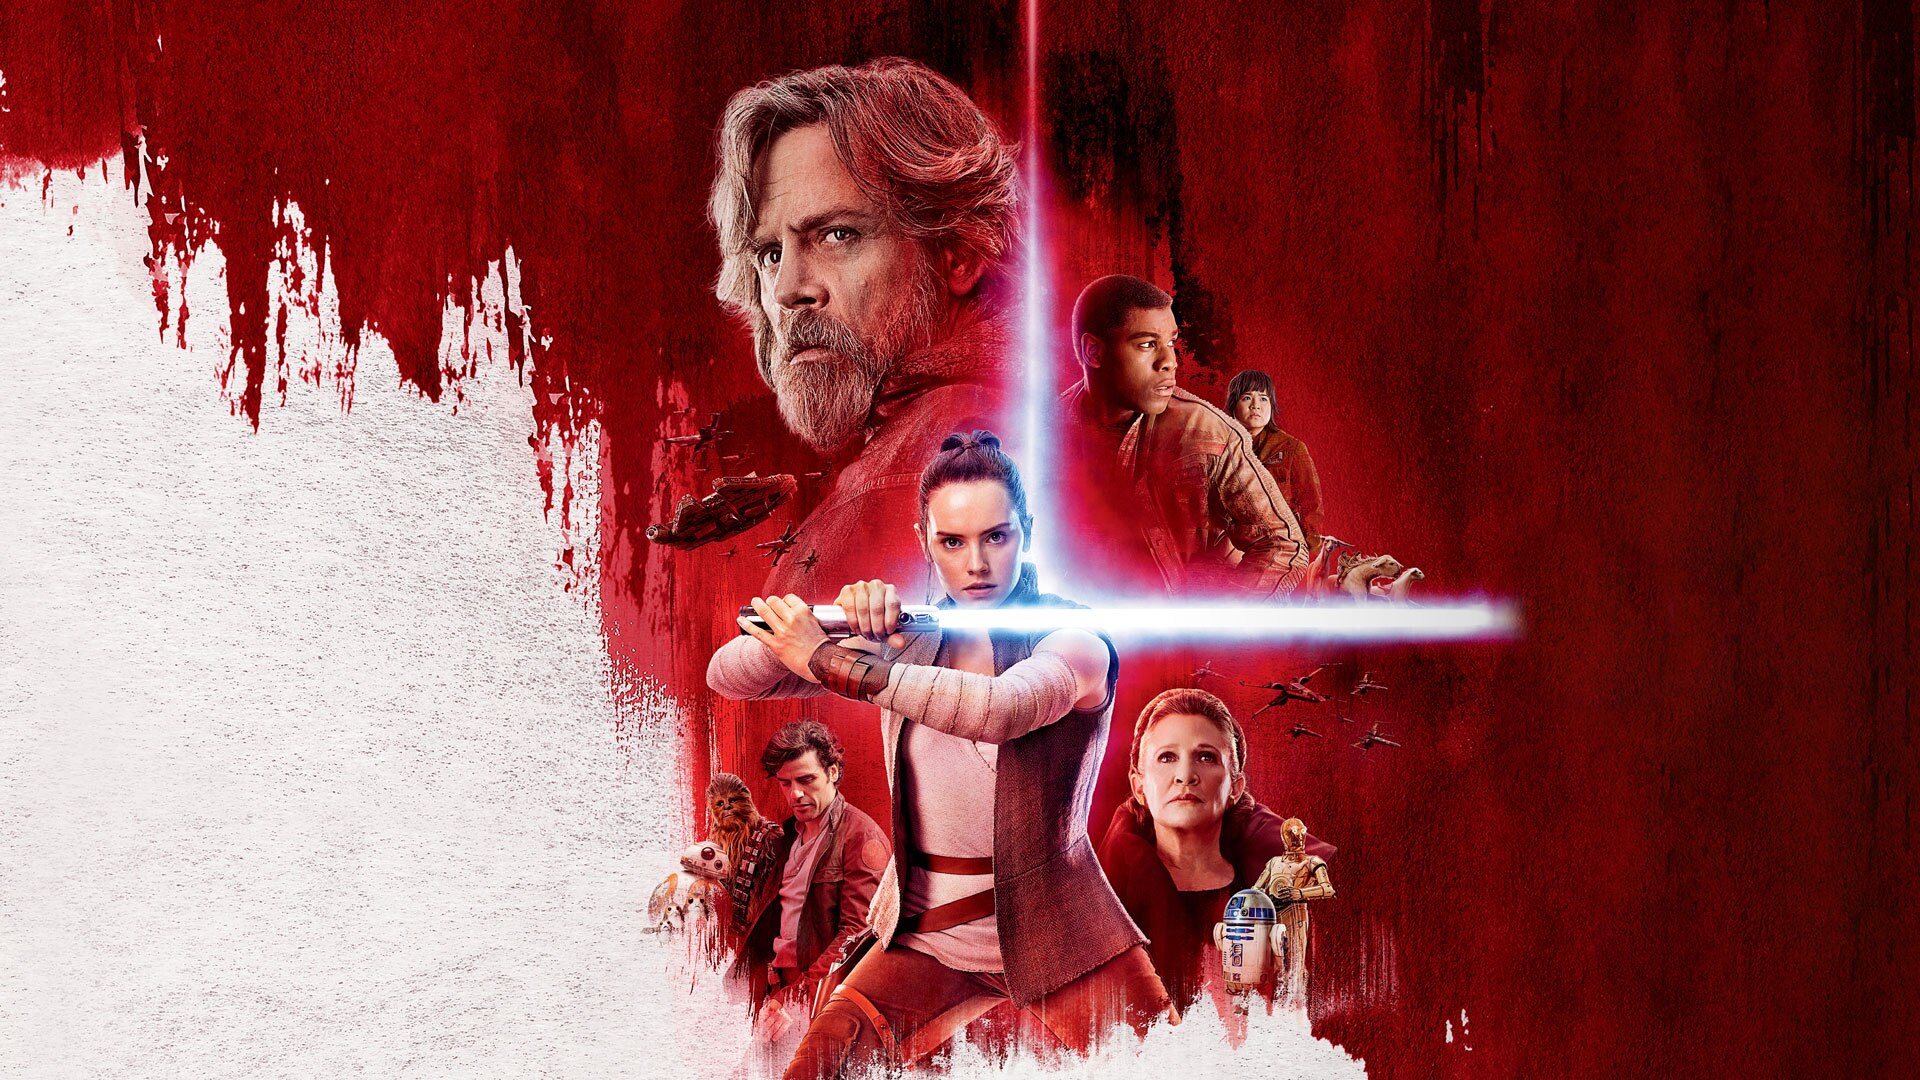 Star Wars: The Last Jedi' review: A visual delight accompanied with stellar  performances by the ace star cast - The Economic Times